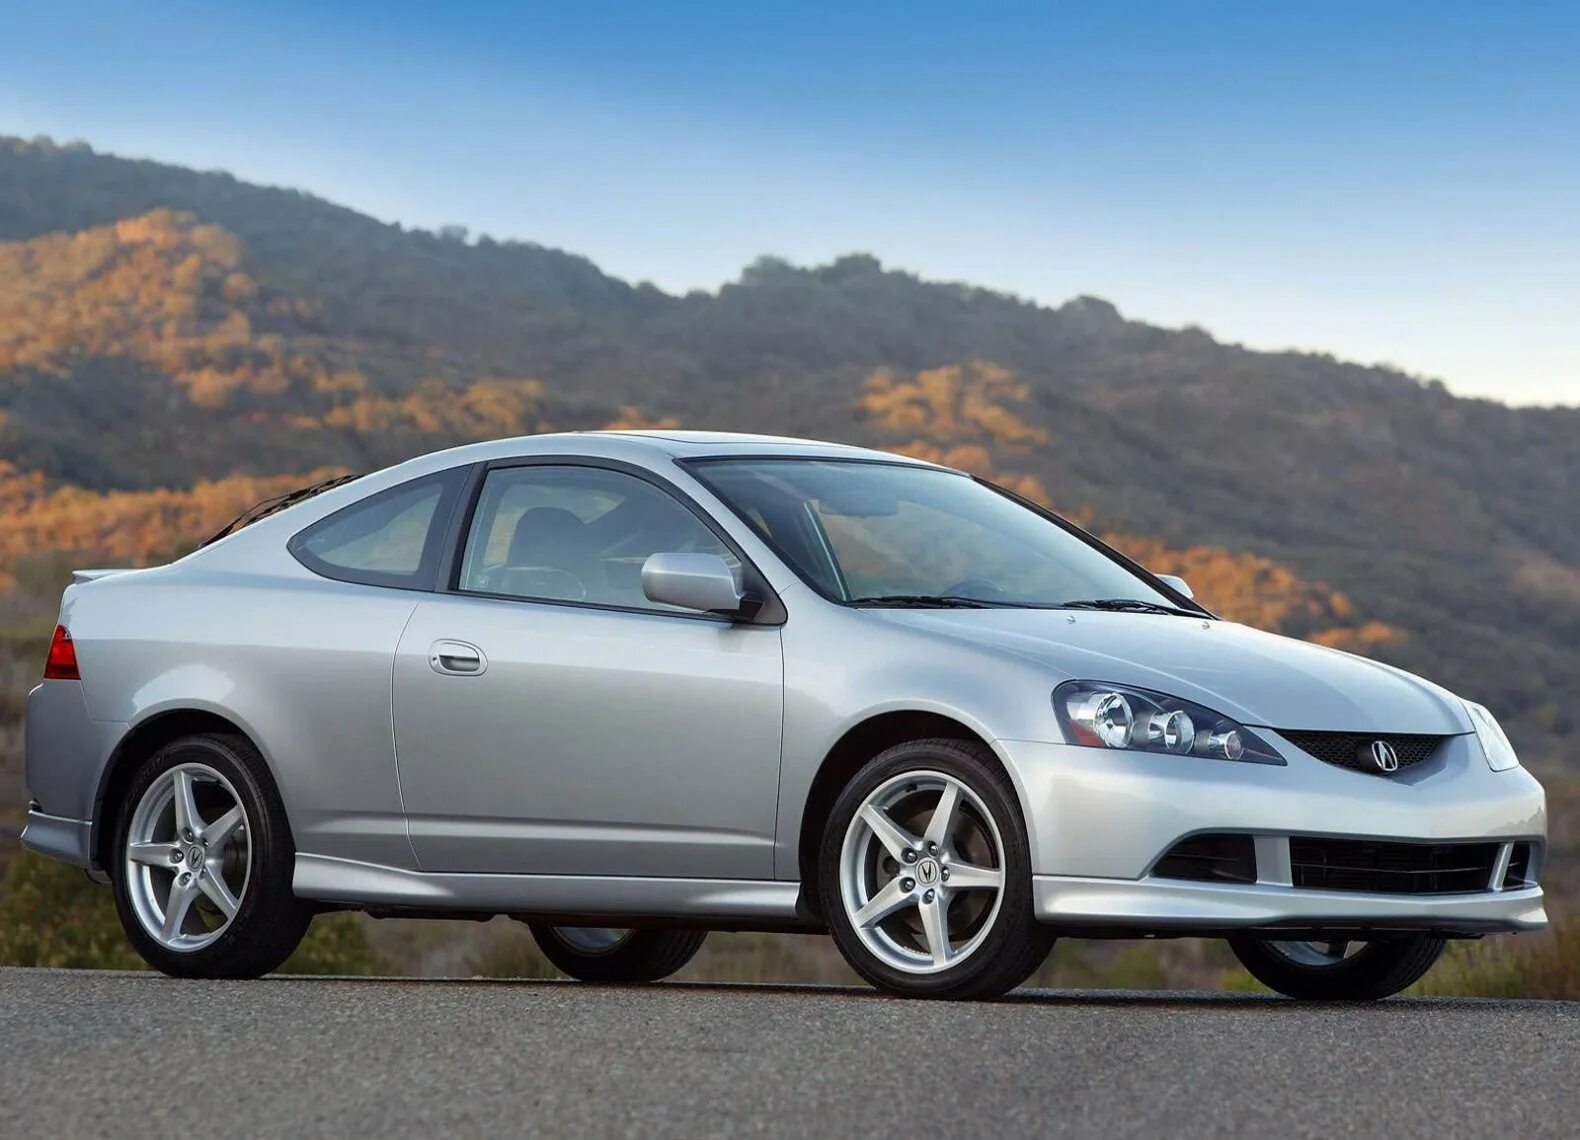 Acura RSX Type-s. Акура RSX 2005. Acura RSX Type s 2005. Acura RSX 2005.